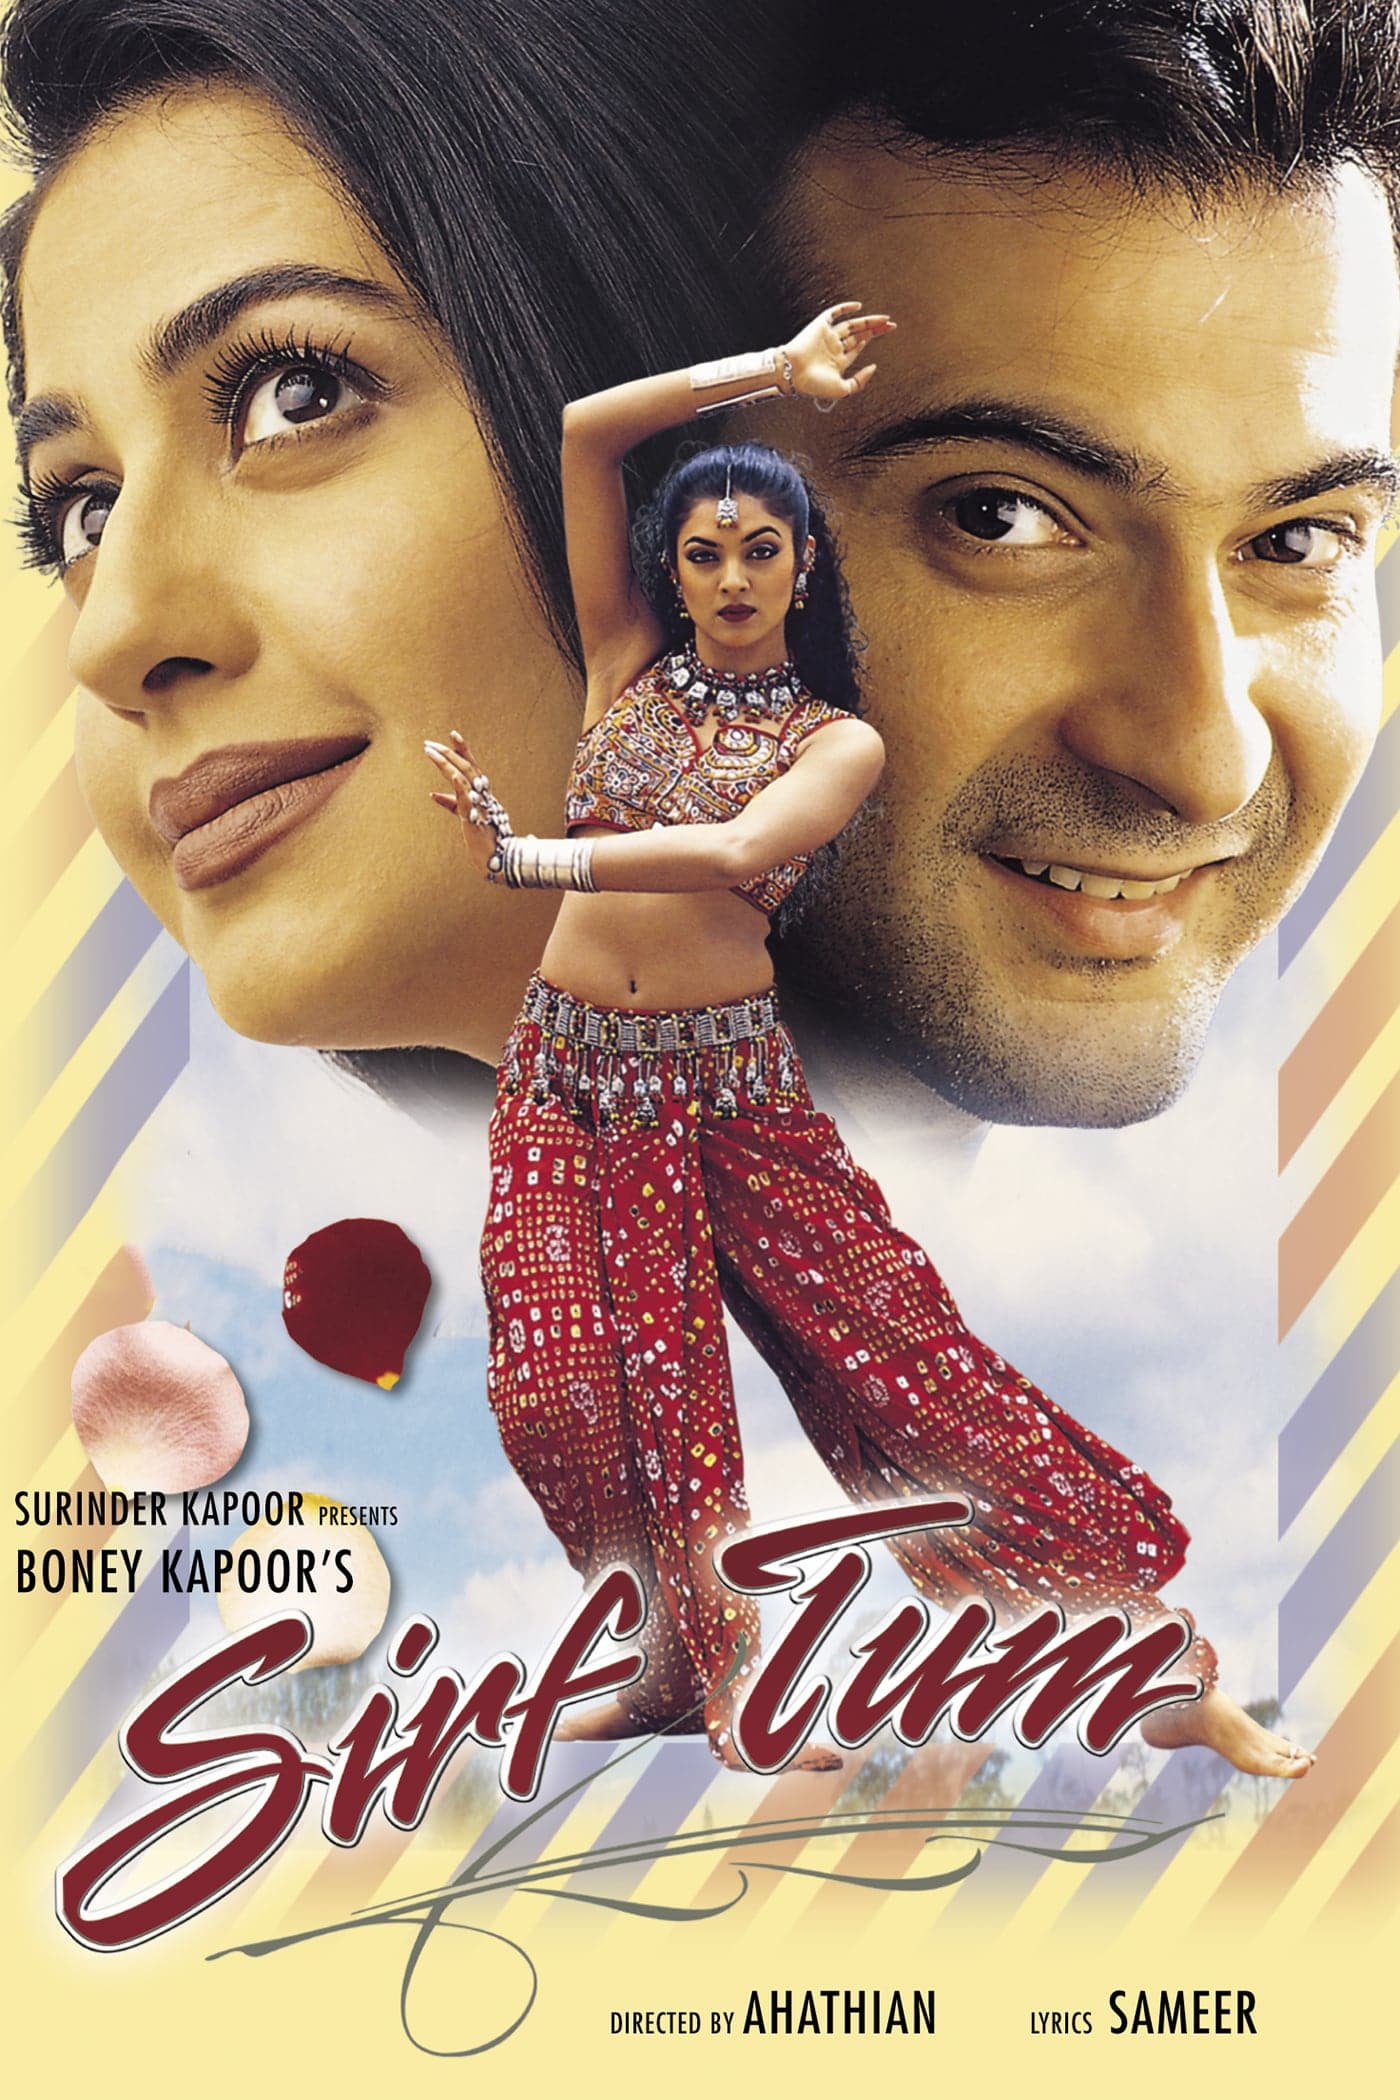 Poster for the movie "Sirf Tum"